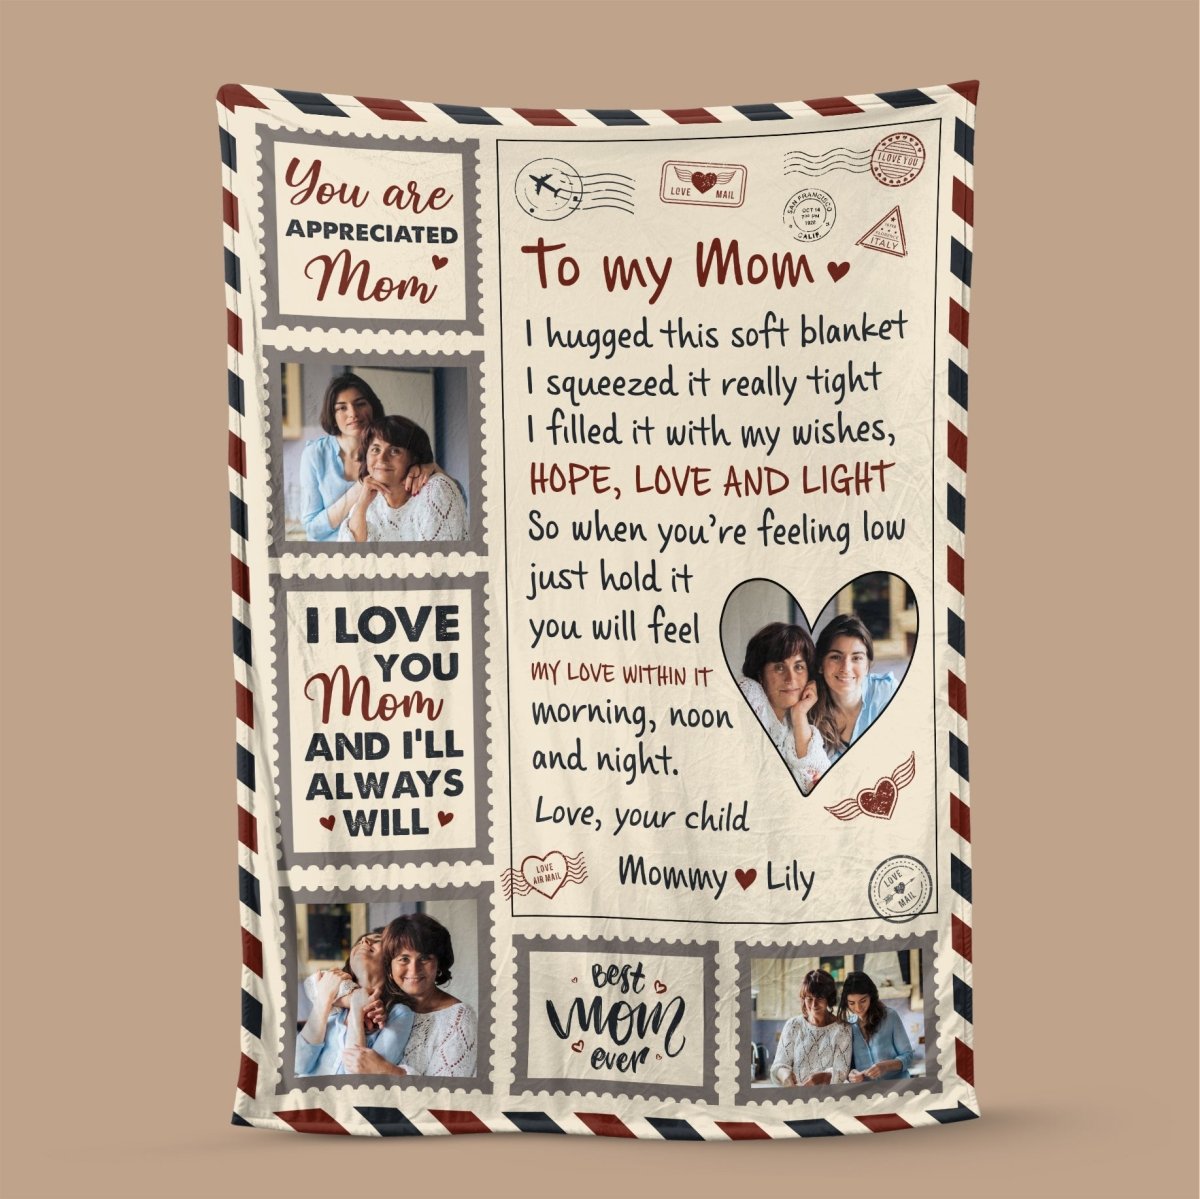 https://cdn.shopify.com/s/files/1/0640/1861/2460/products/you-are-appreciated-mom-personalized-blanket-best-gift-for-mother-750591_1600x.jpg?v=1681289118